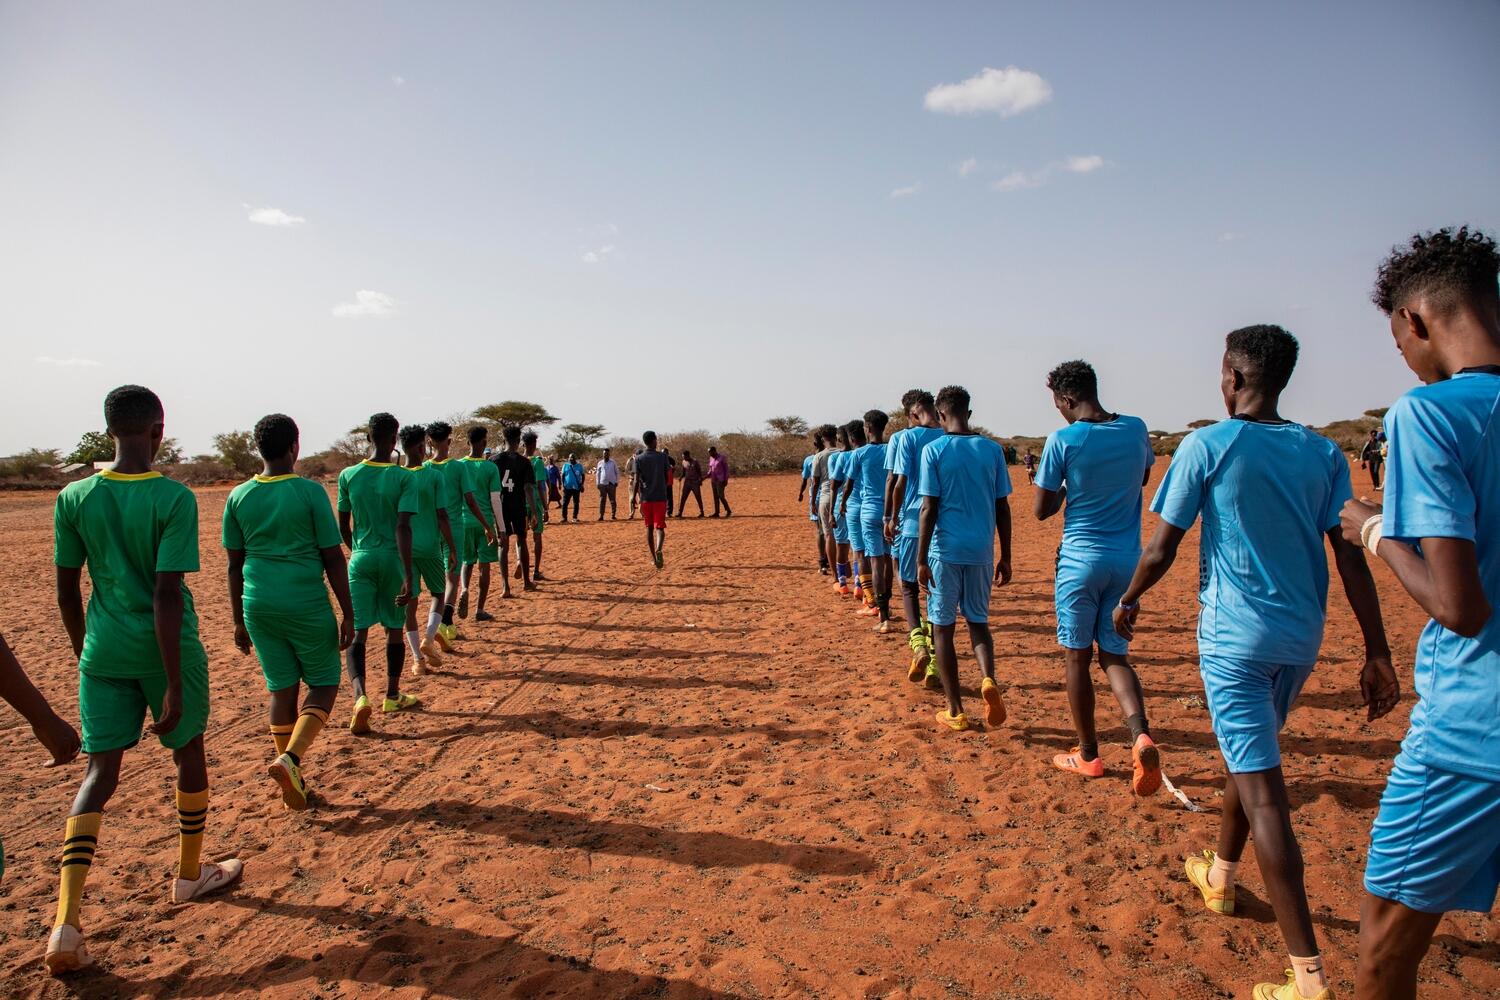 Two lines of players wearing green and blue kits walk onto a dusty soccer pitch.